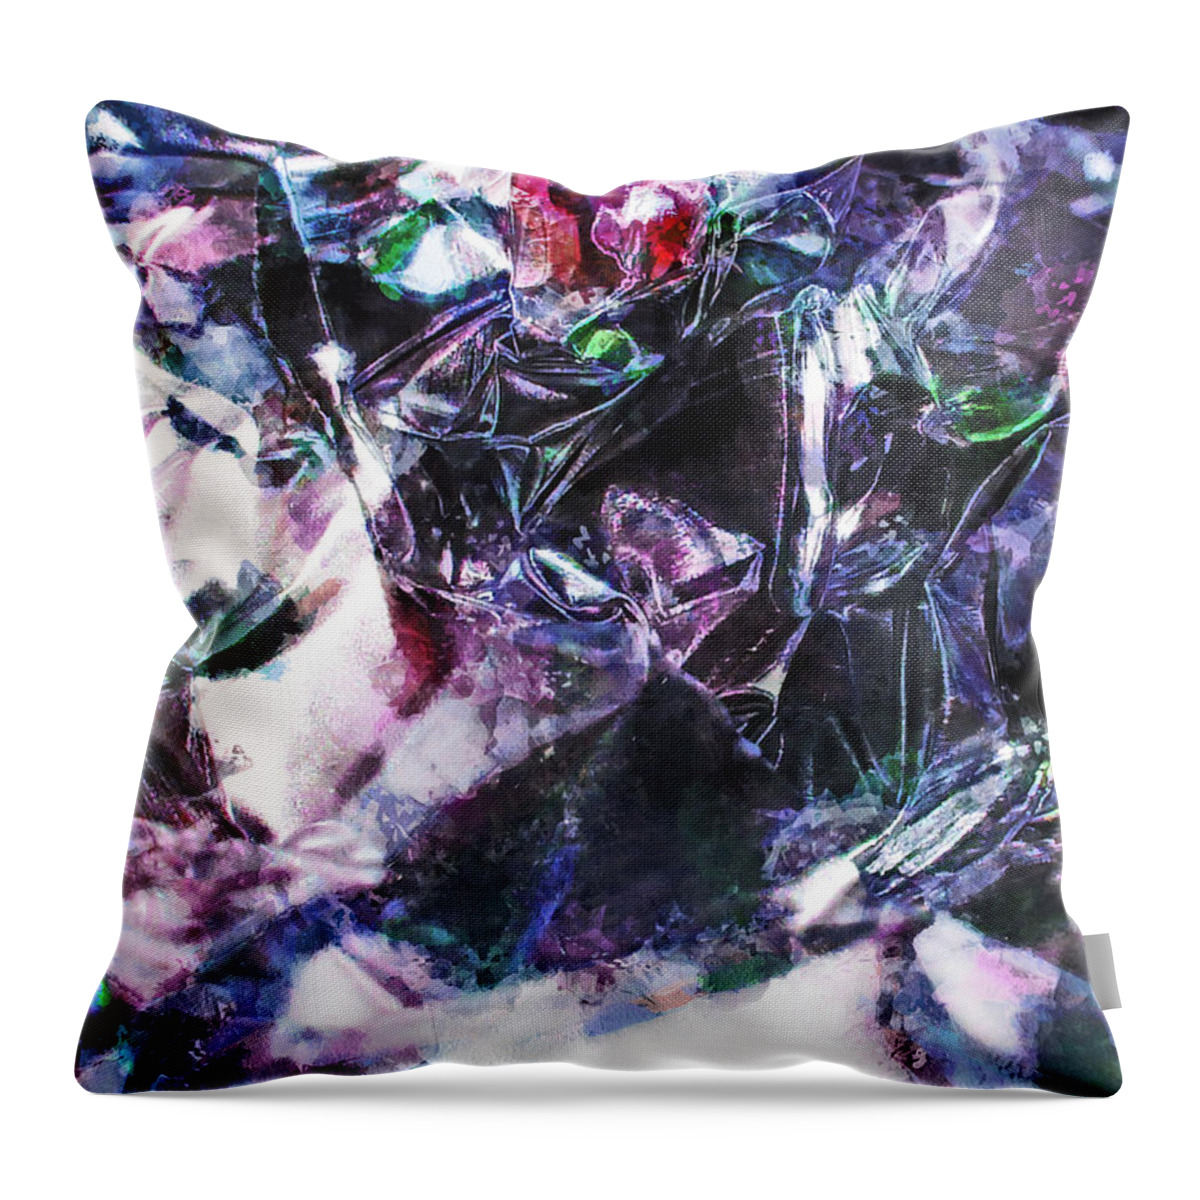 I Can't Get No Sleep Throw Pillow featuring the digital art I can't get no sleep by Steve Taylor